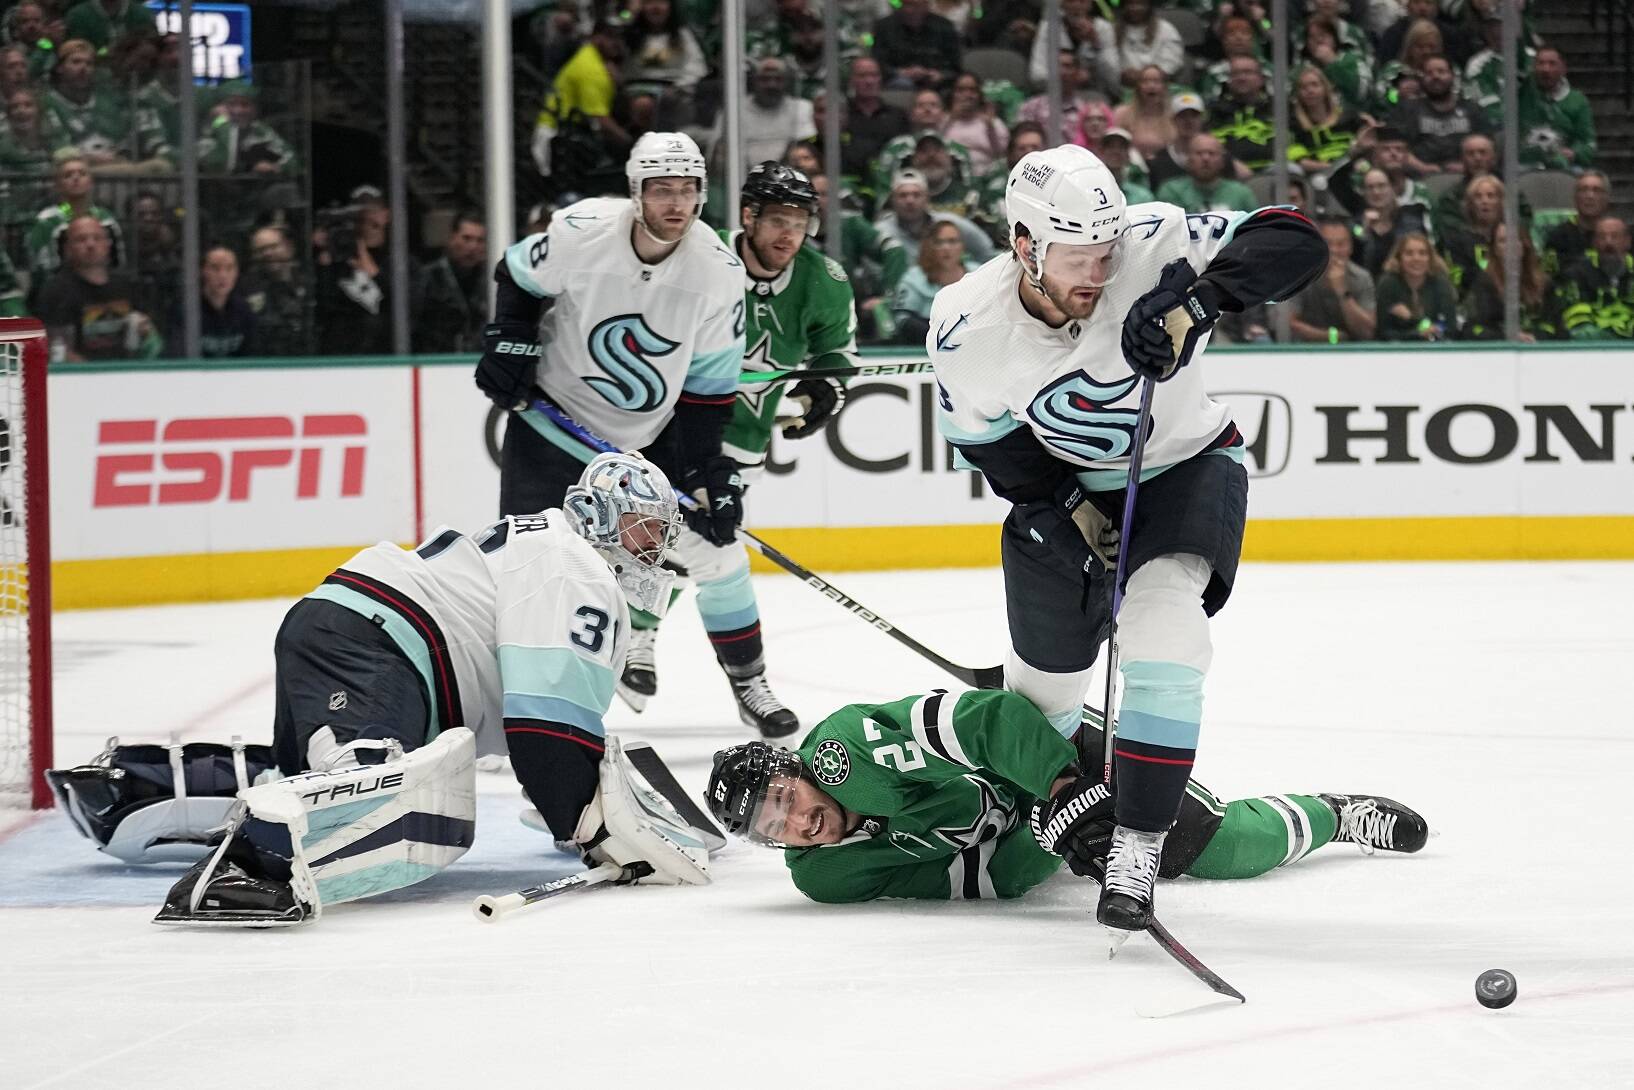 Dallas Stars left wing Mason Marchment, center, attempt to reach the puck in front of Seattle Kraken’s Philipp Grubauer as defenseman Will Borgen, right, moves to take control in the first period of Game 1 of an NHL hockey Stanley Cup second-round playoff series, Tuesday, May 2, 2023, in Dallas. (AP Photo/Tony Gutierrez)